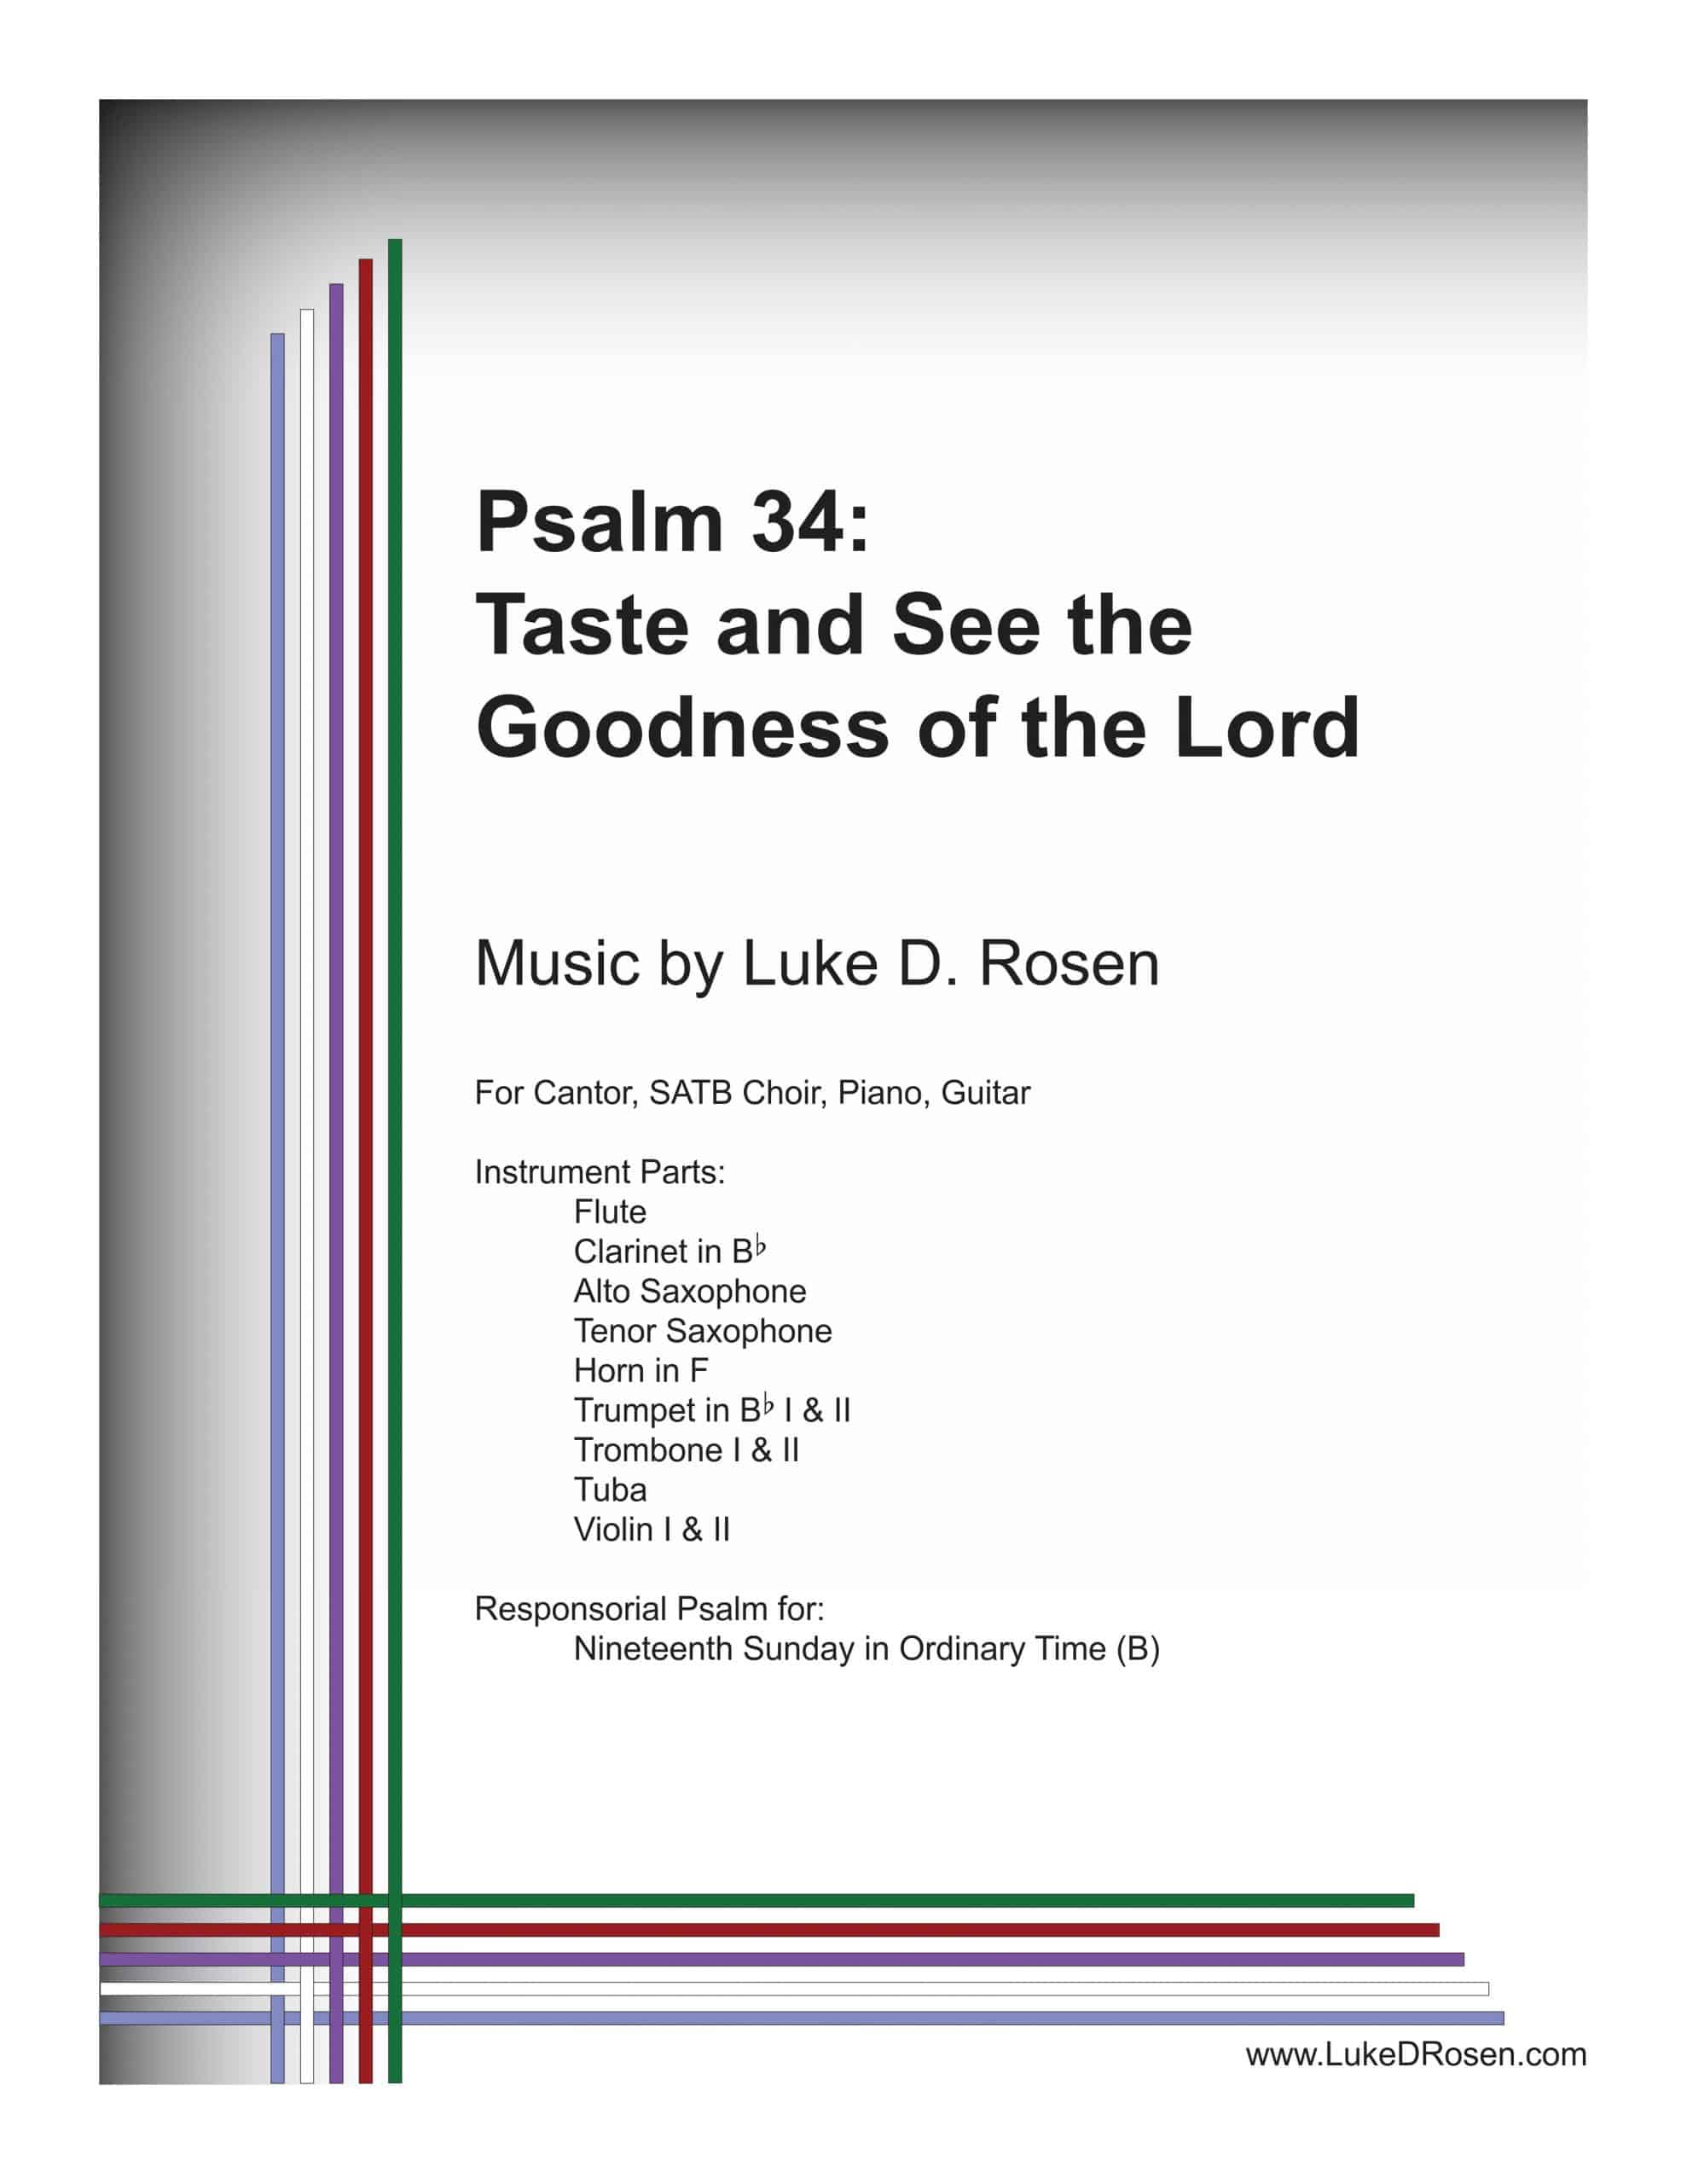 Psalm 34 – Taste and See the Goodness of the Lord (Rosen)